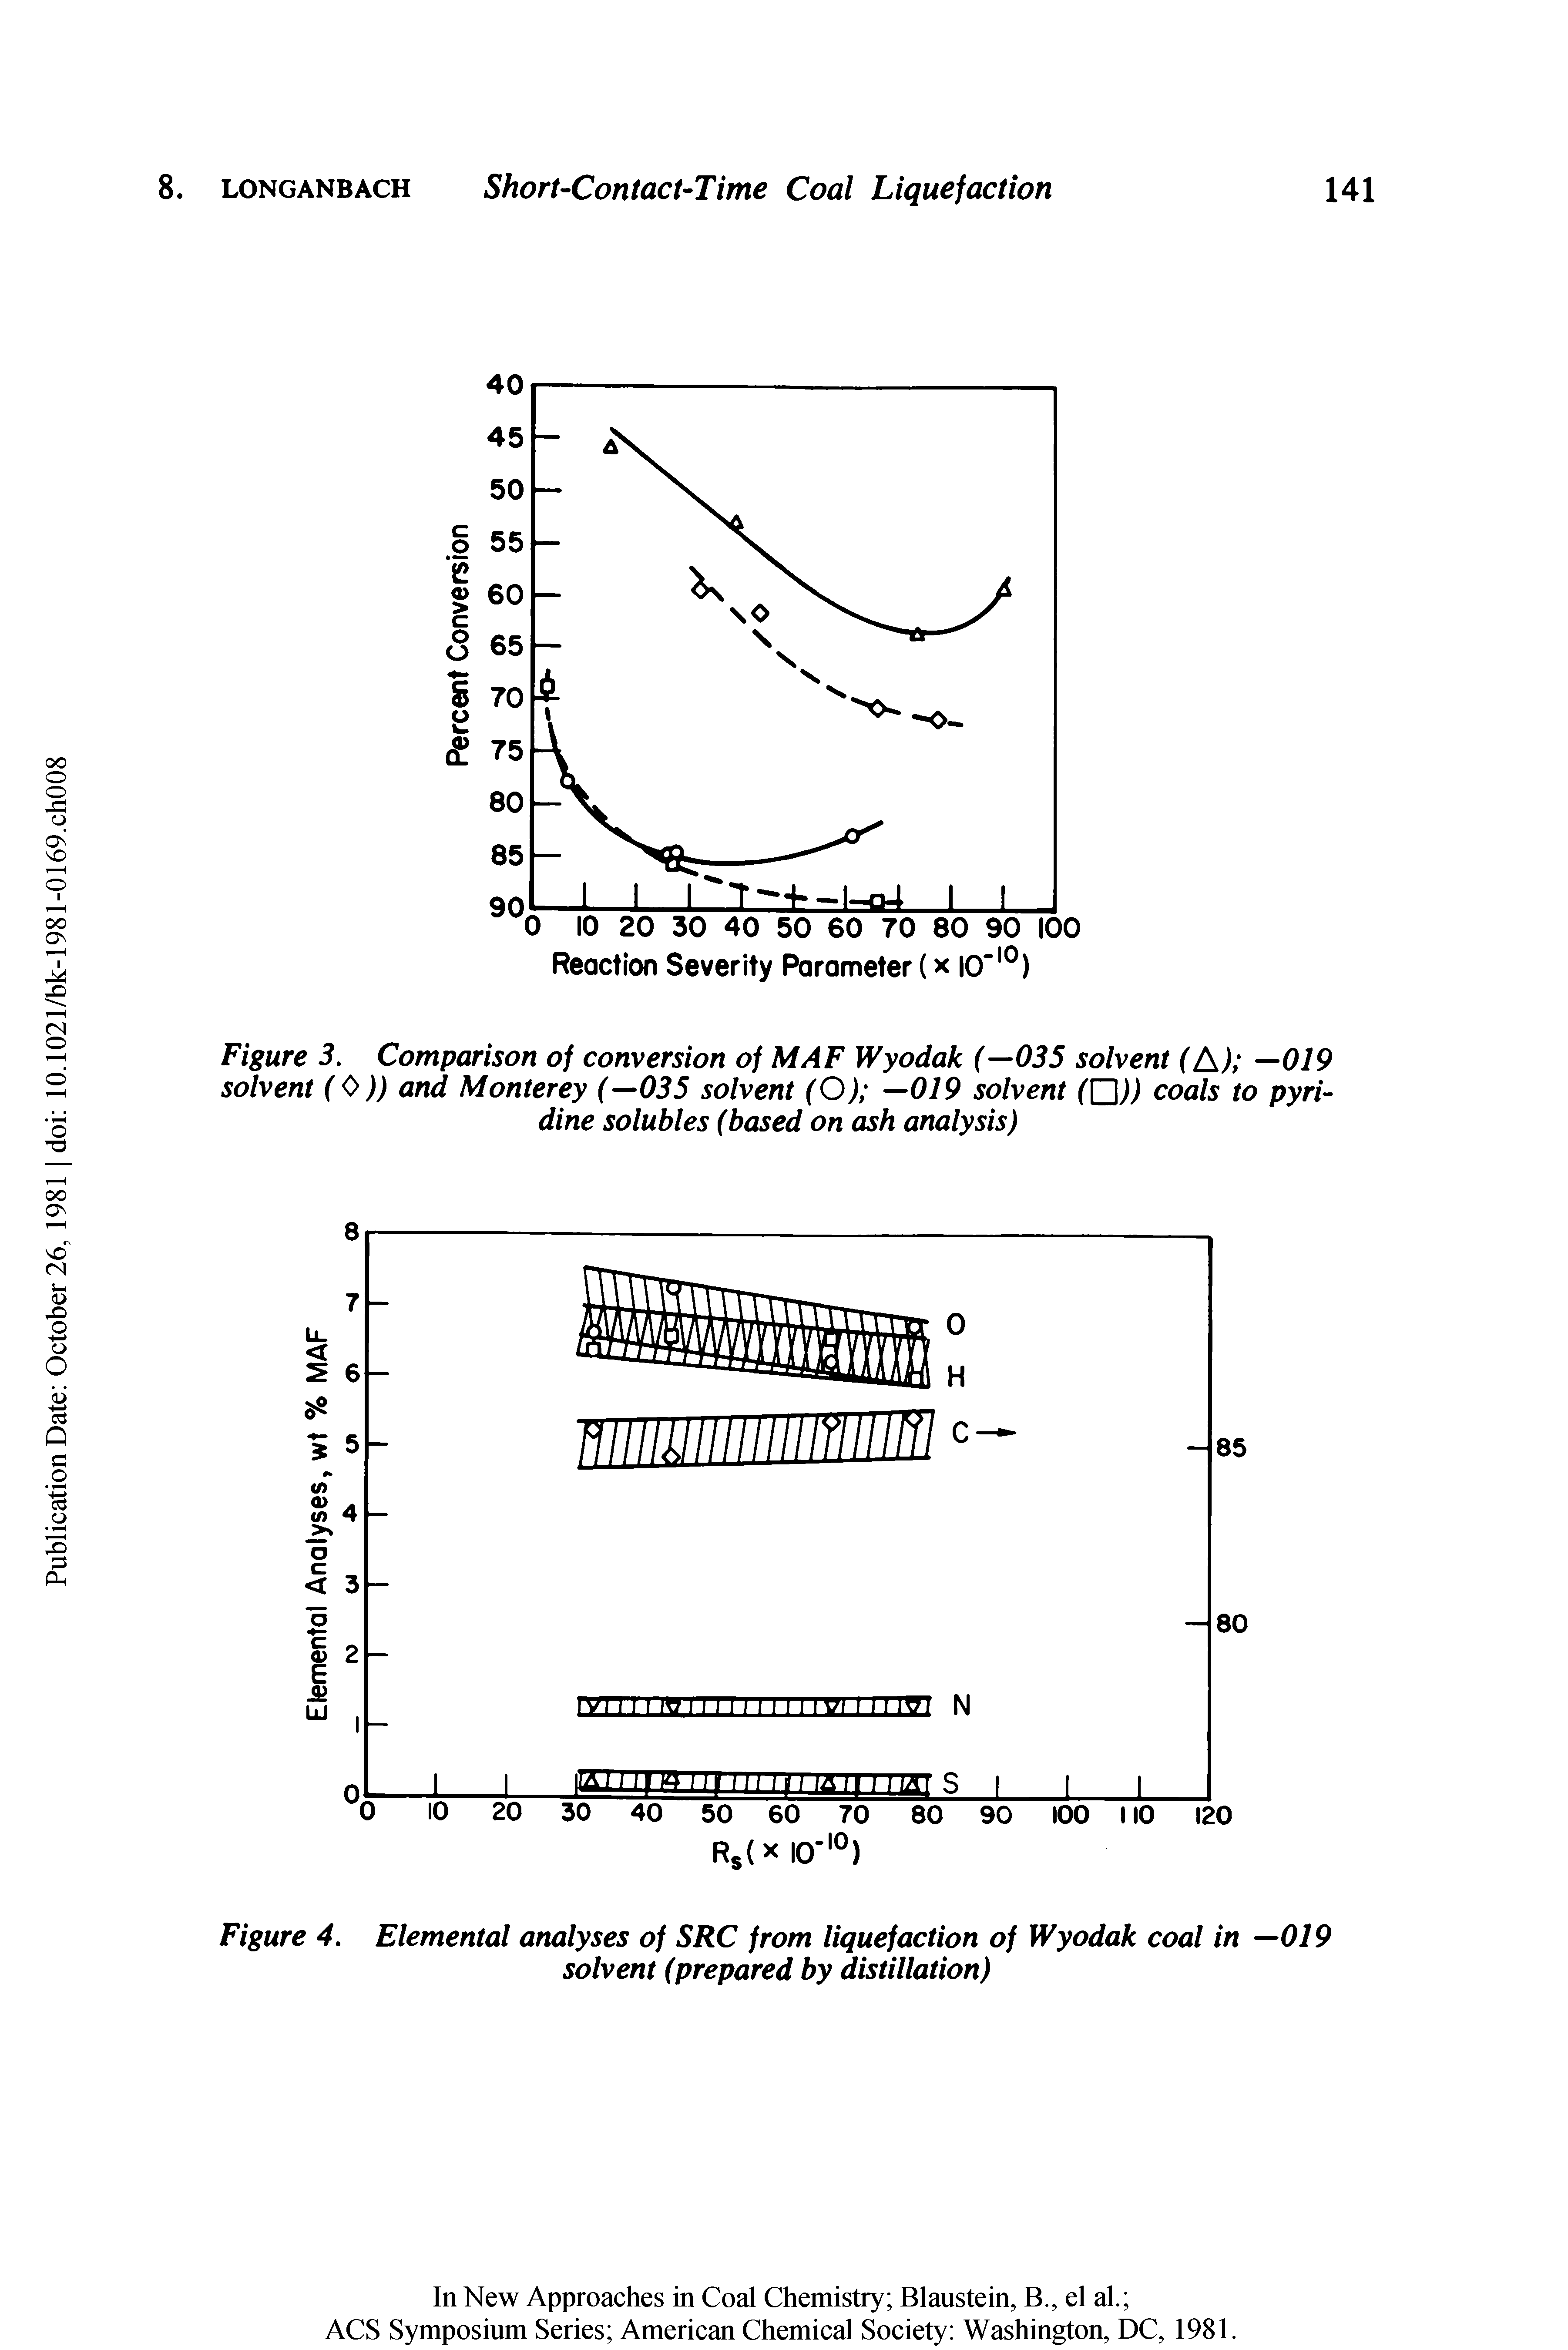 Figure 3. Comparison of conversion of MAF Wyodak (—035 solvent (A/ —0/9 solvent (0)) and Monterey (—035 solvent (O) —019 solvent ( Z )) coals to pyridine solubles (based on ash analysis)...